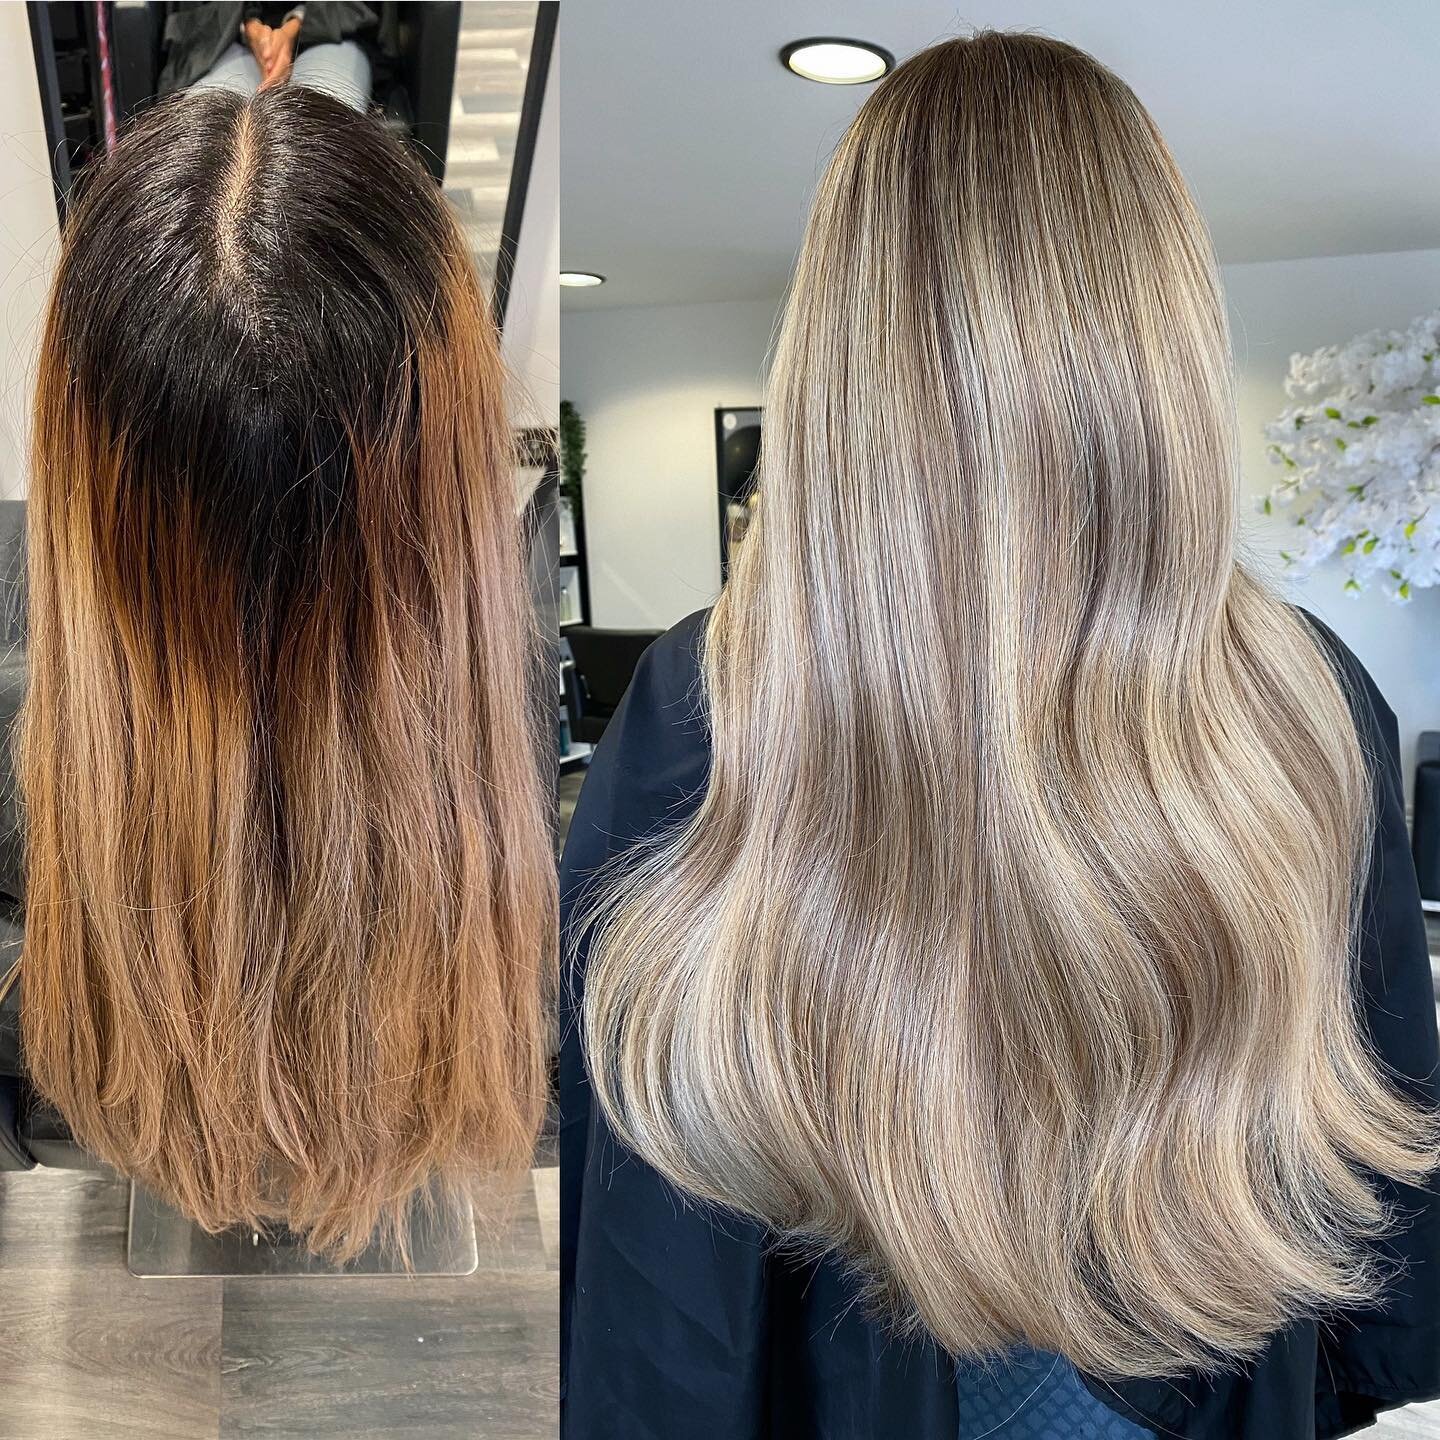 𝐩𝐞𝐫𝐟𝐞𝐜𝐭𝐢𝐨𝐧 𝐭𝐚𝐤𝐞𝐬 𝐭𝐢𝐦𝐞 ❣️ 7 hour colour correction adding dimension throughout &amp; seamlessly blending out the natural colour✨

-
-
-
-
#ElliotCaffreyHair #hairextensionspecialist #hairextensionsmanchester #salon #beautyworks #hai